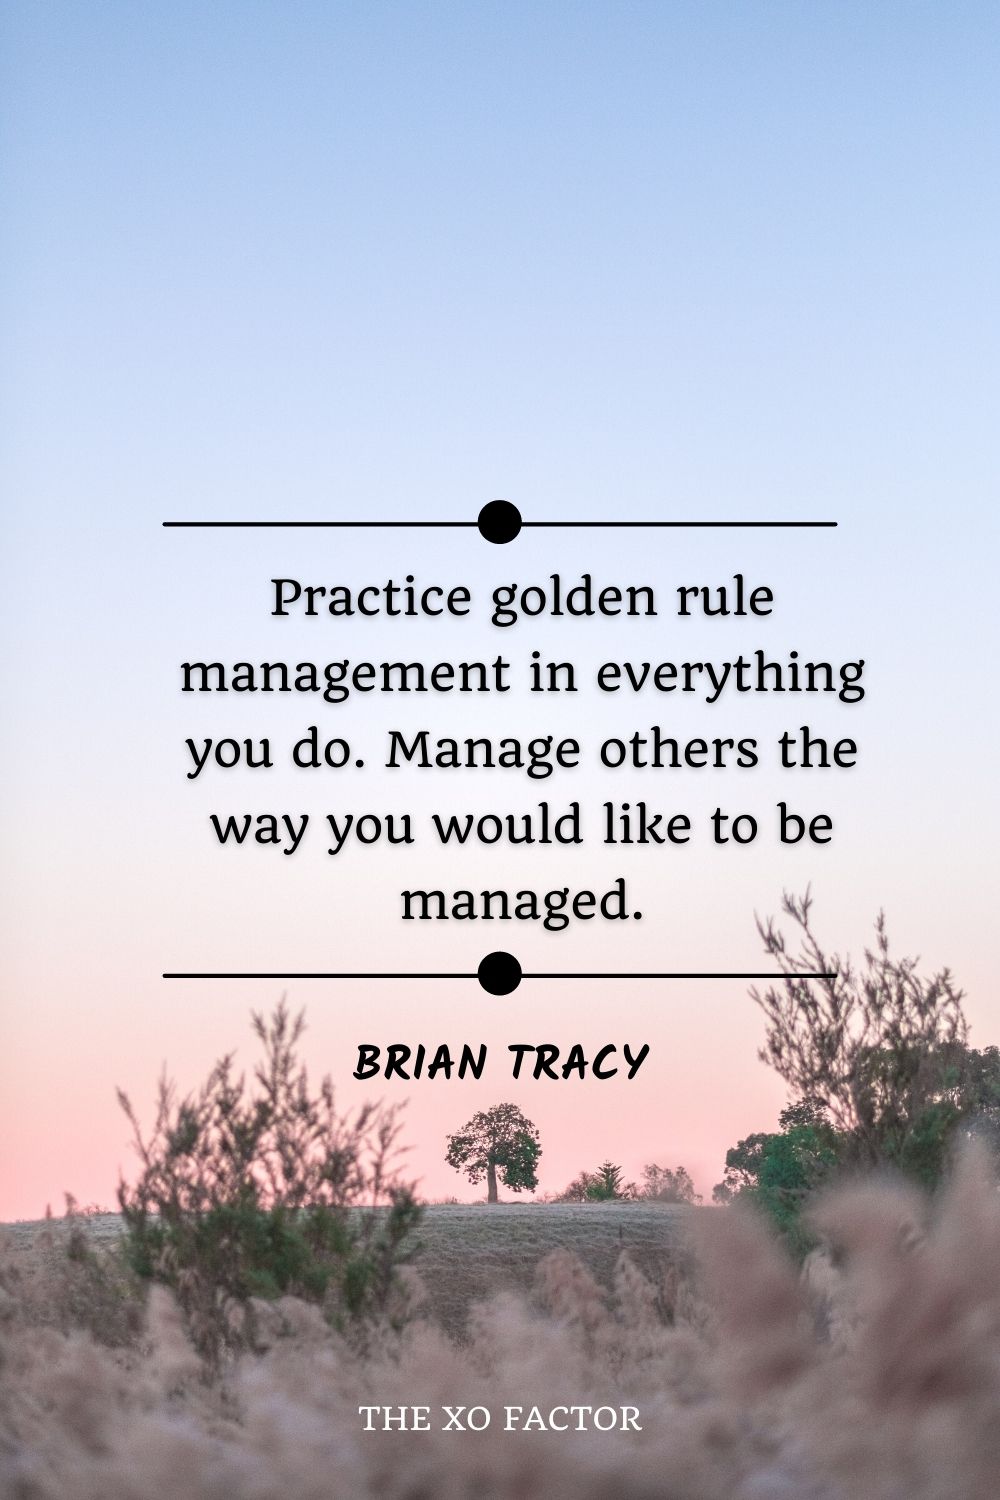 Practice golden rule management in everything you do. Manage others the way you would like to be managed.” – Brian Tracy